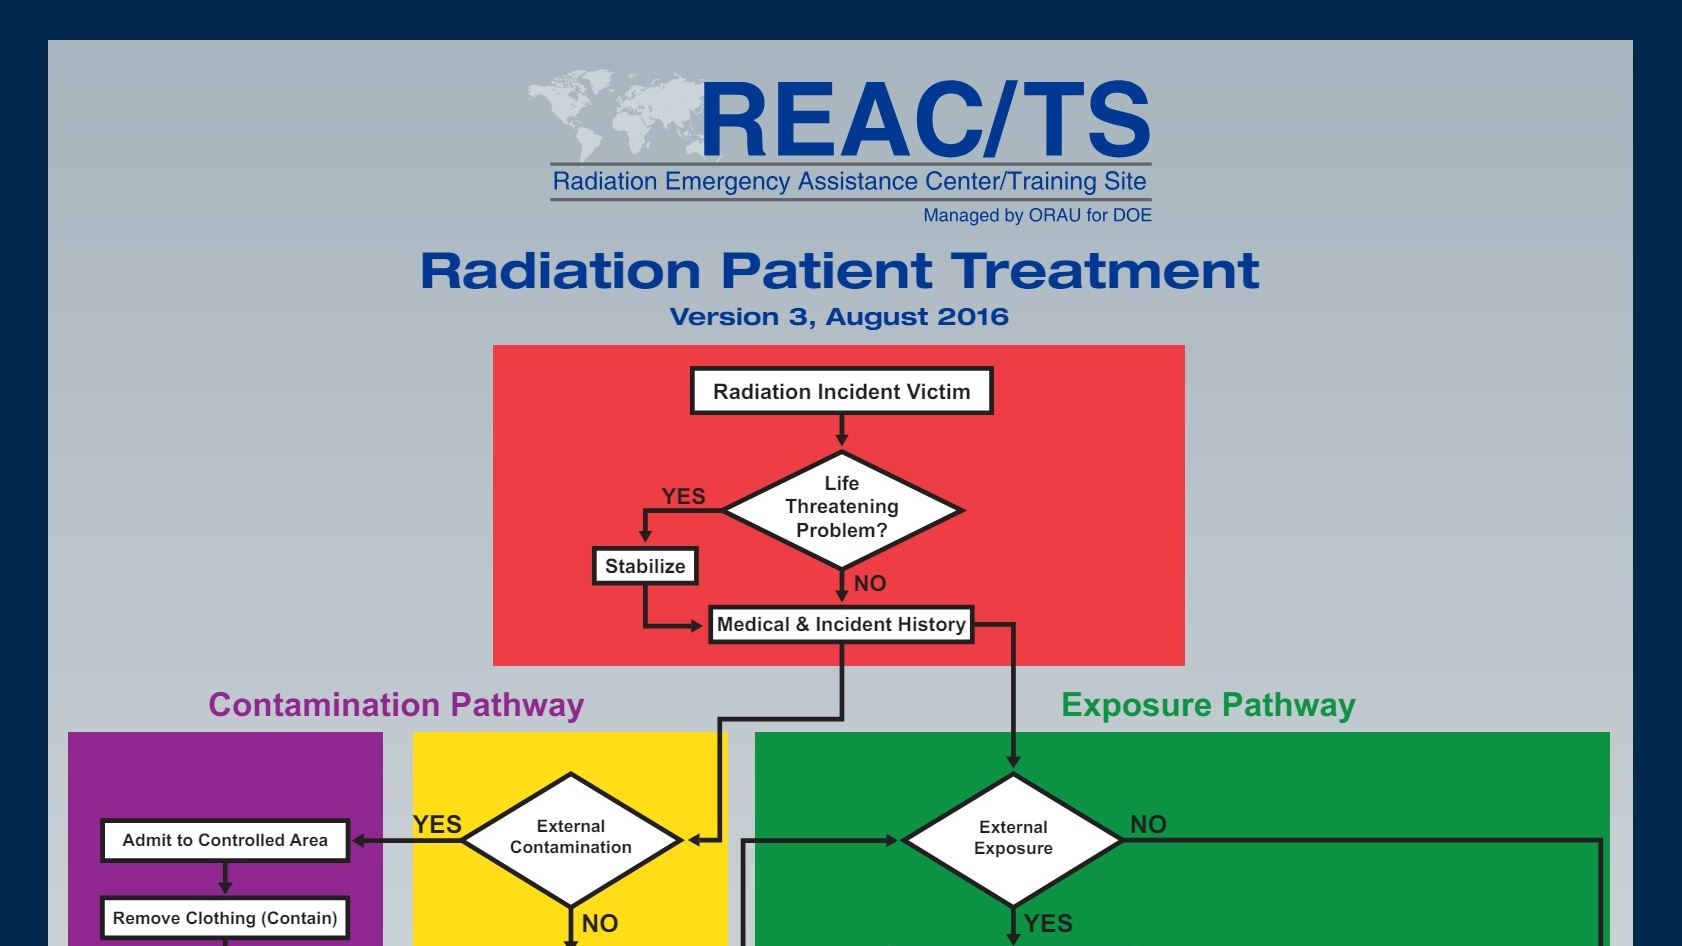 Cover page for REACTS clinician guide for radiation patient treatment